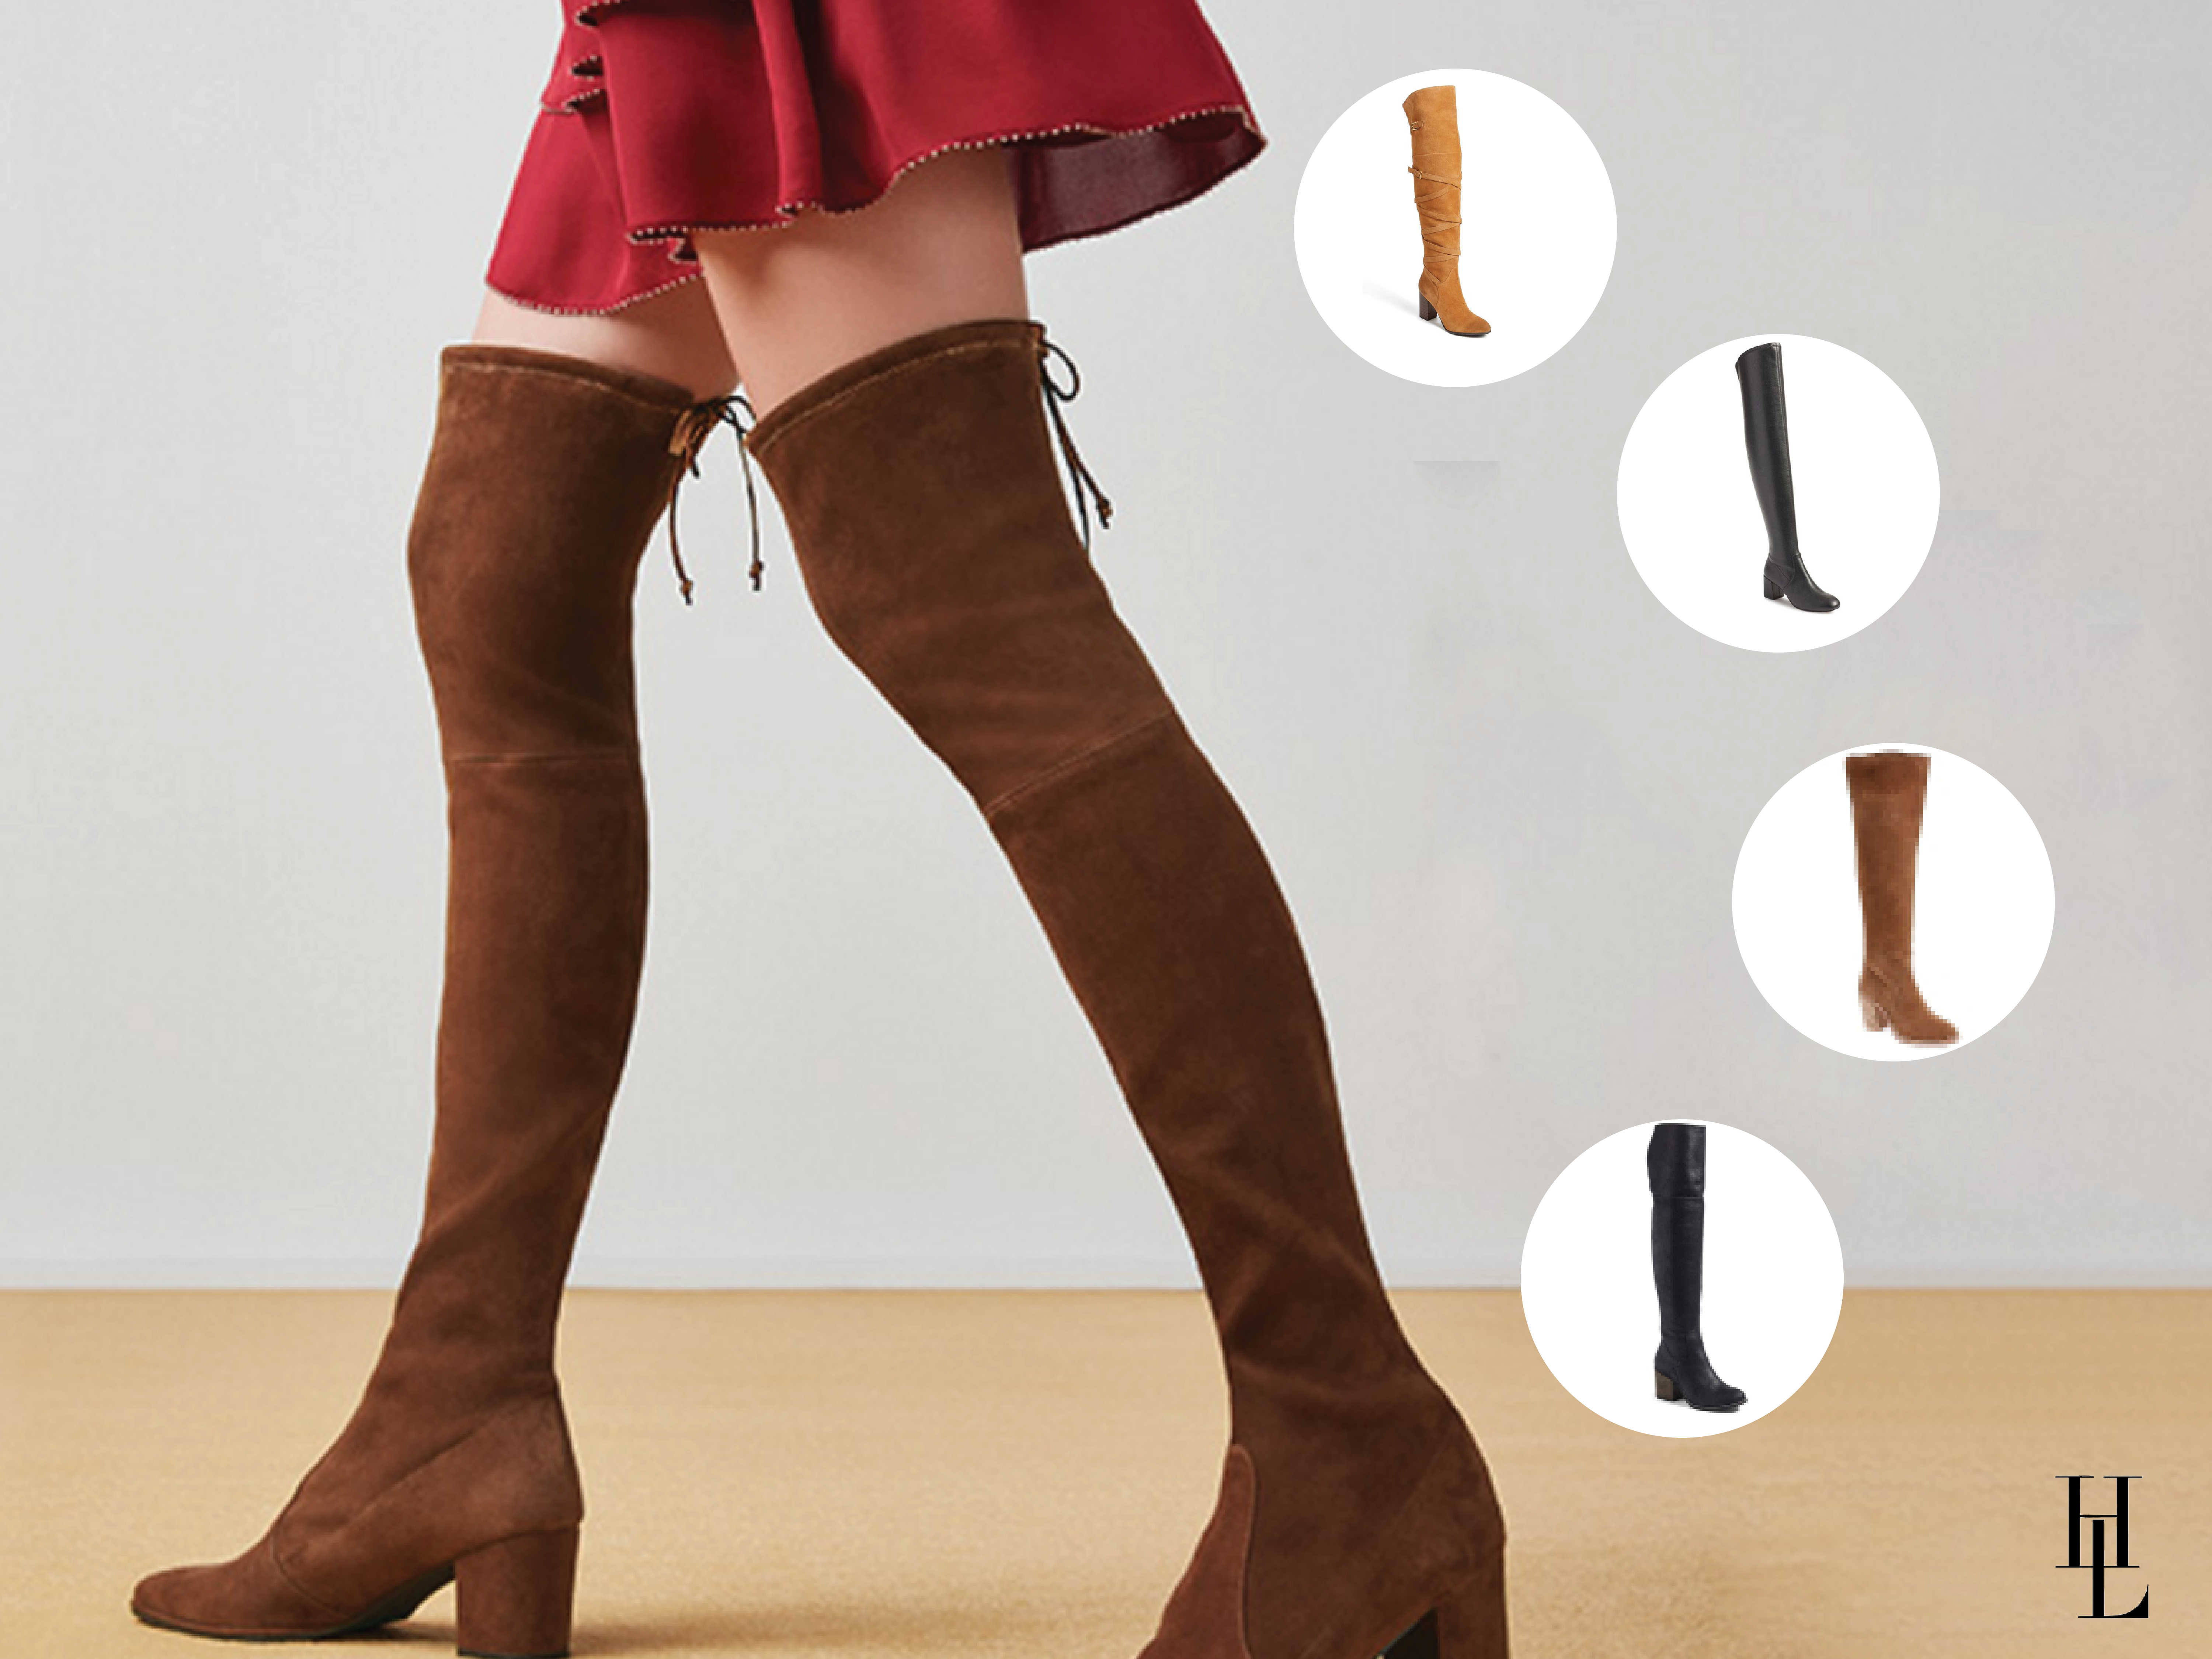 Stuart Weitzman 'Thighland' Over the Knee Boot, Sam Edelman 'Sable' Over the Knee Boot, Rebecca Minkoff 'Lauren' Thigh High Boot, Hinge 'Canton' Over the Knee Boot, Vince Camuto 'Melaya' Over the Knee Boot